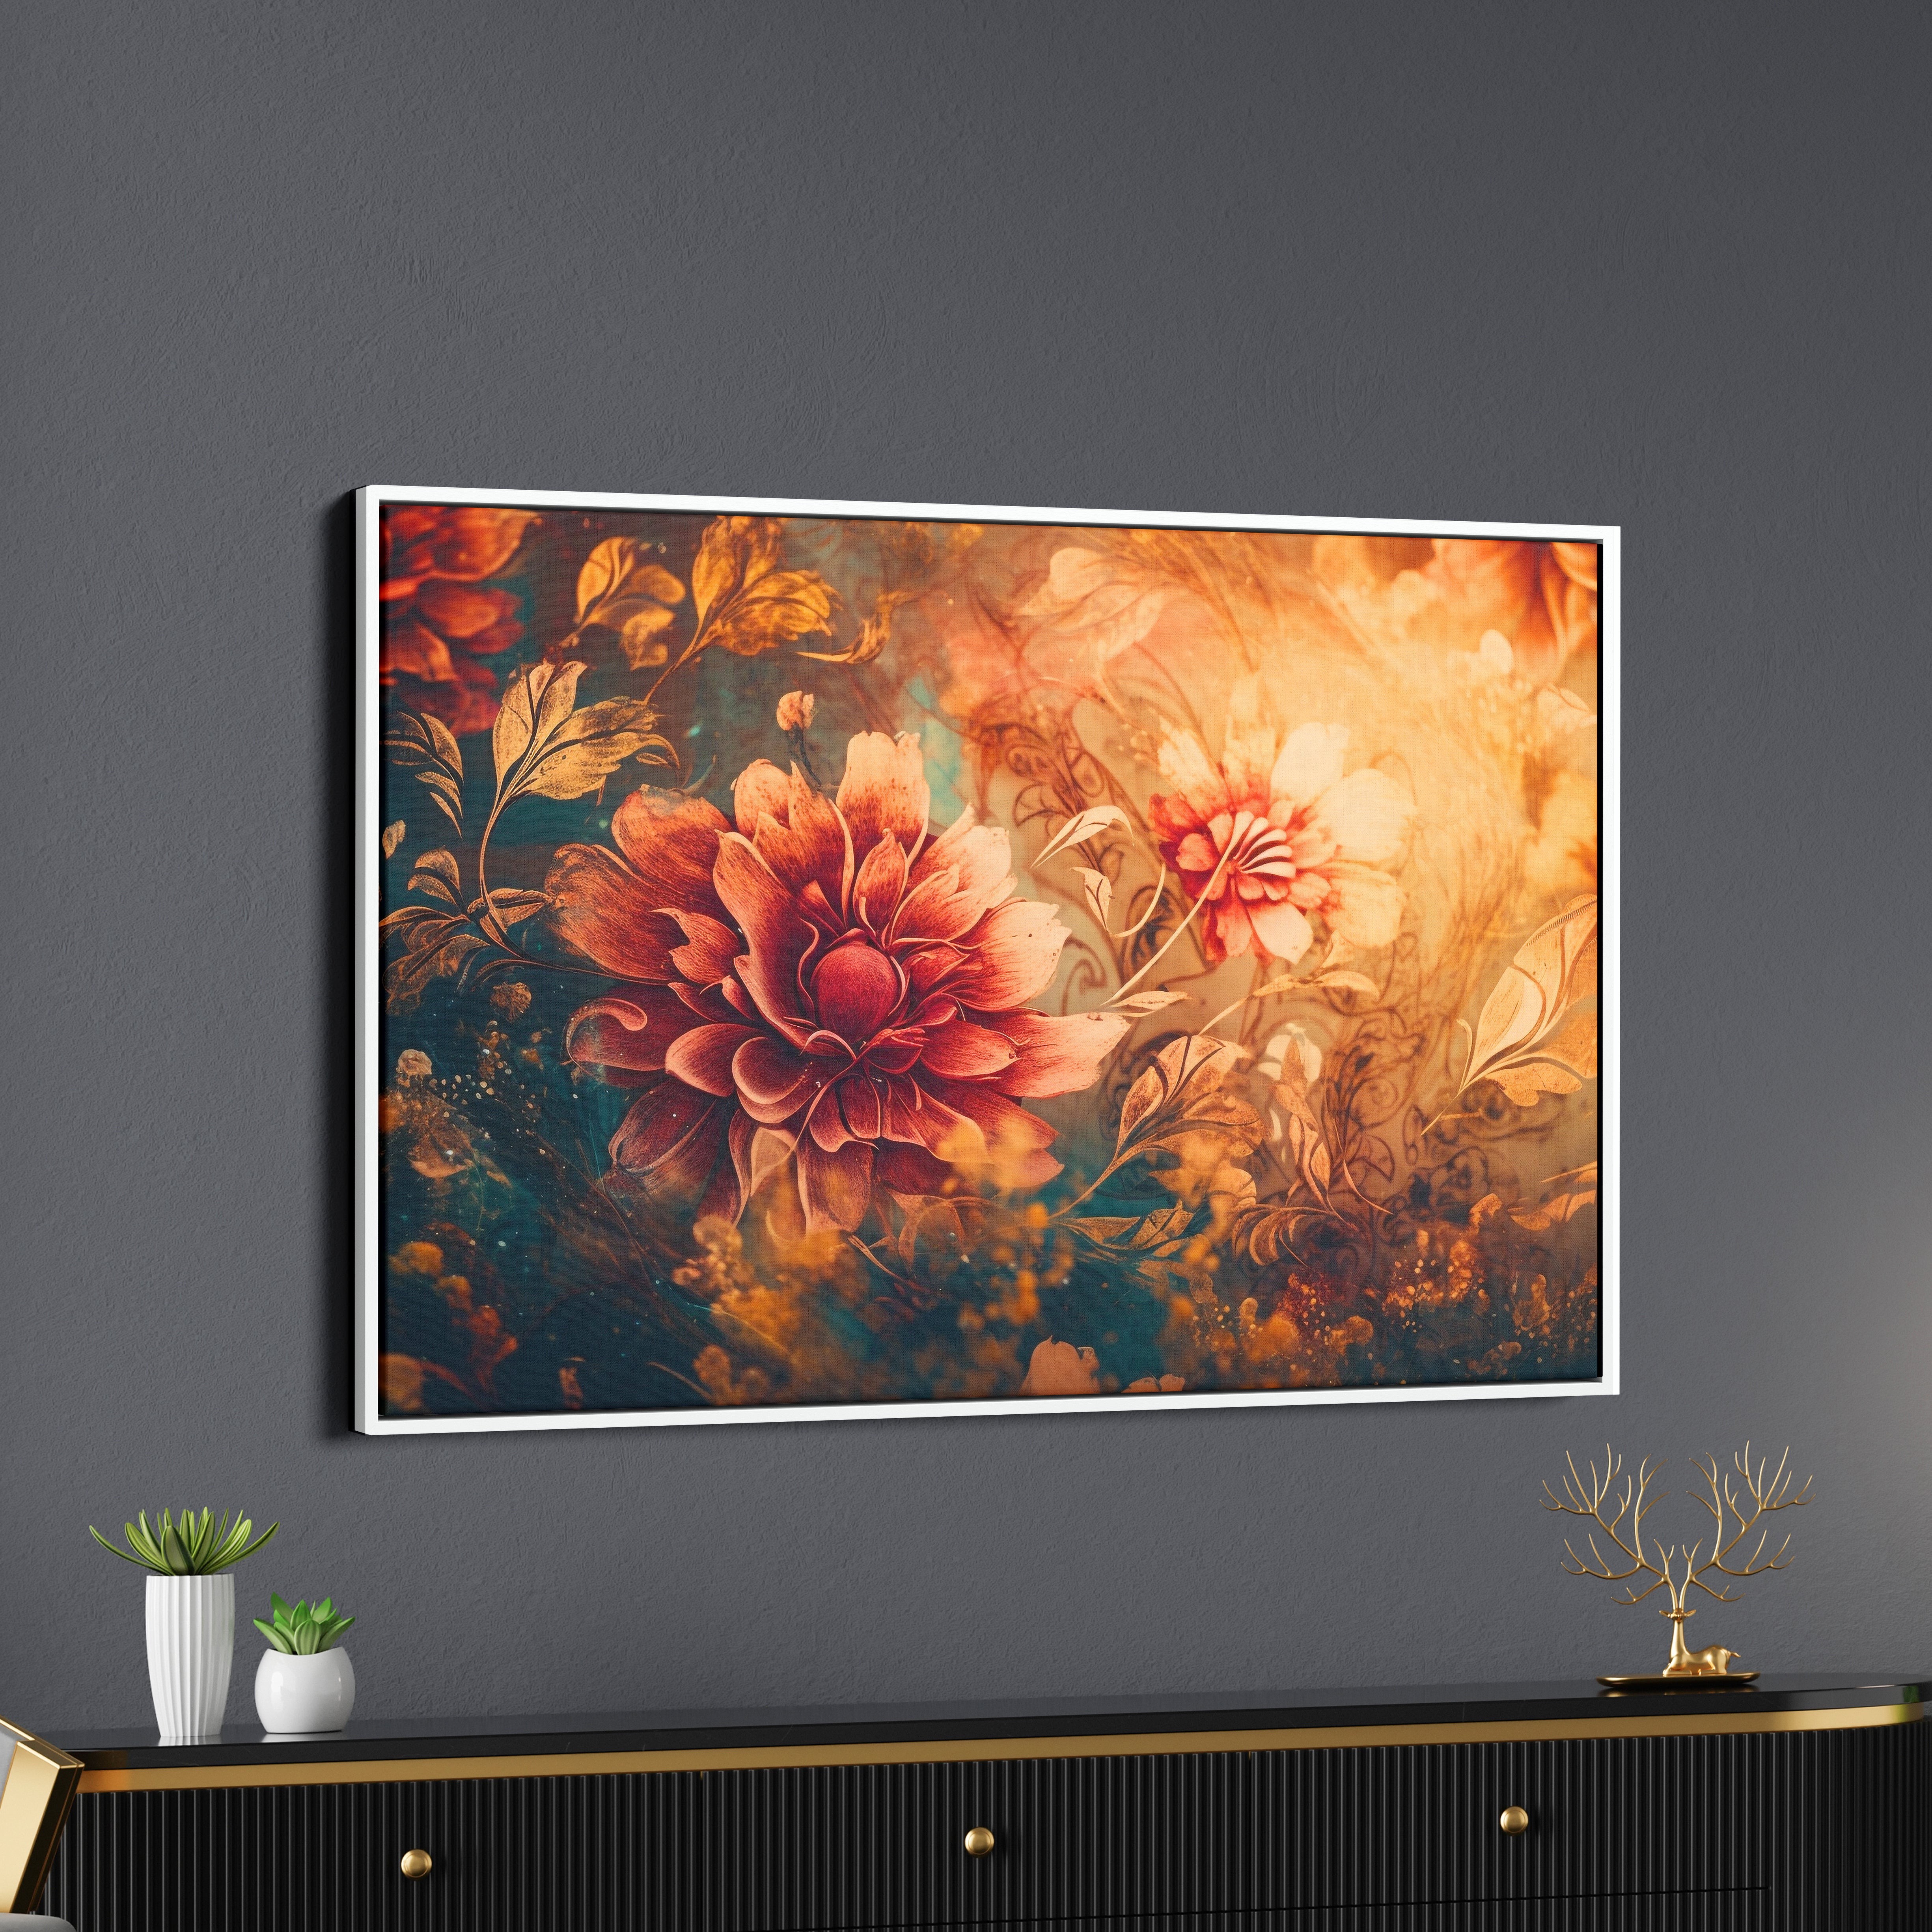 Floral Patterns Decorate Canvas Wall Painting